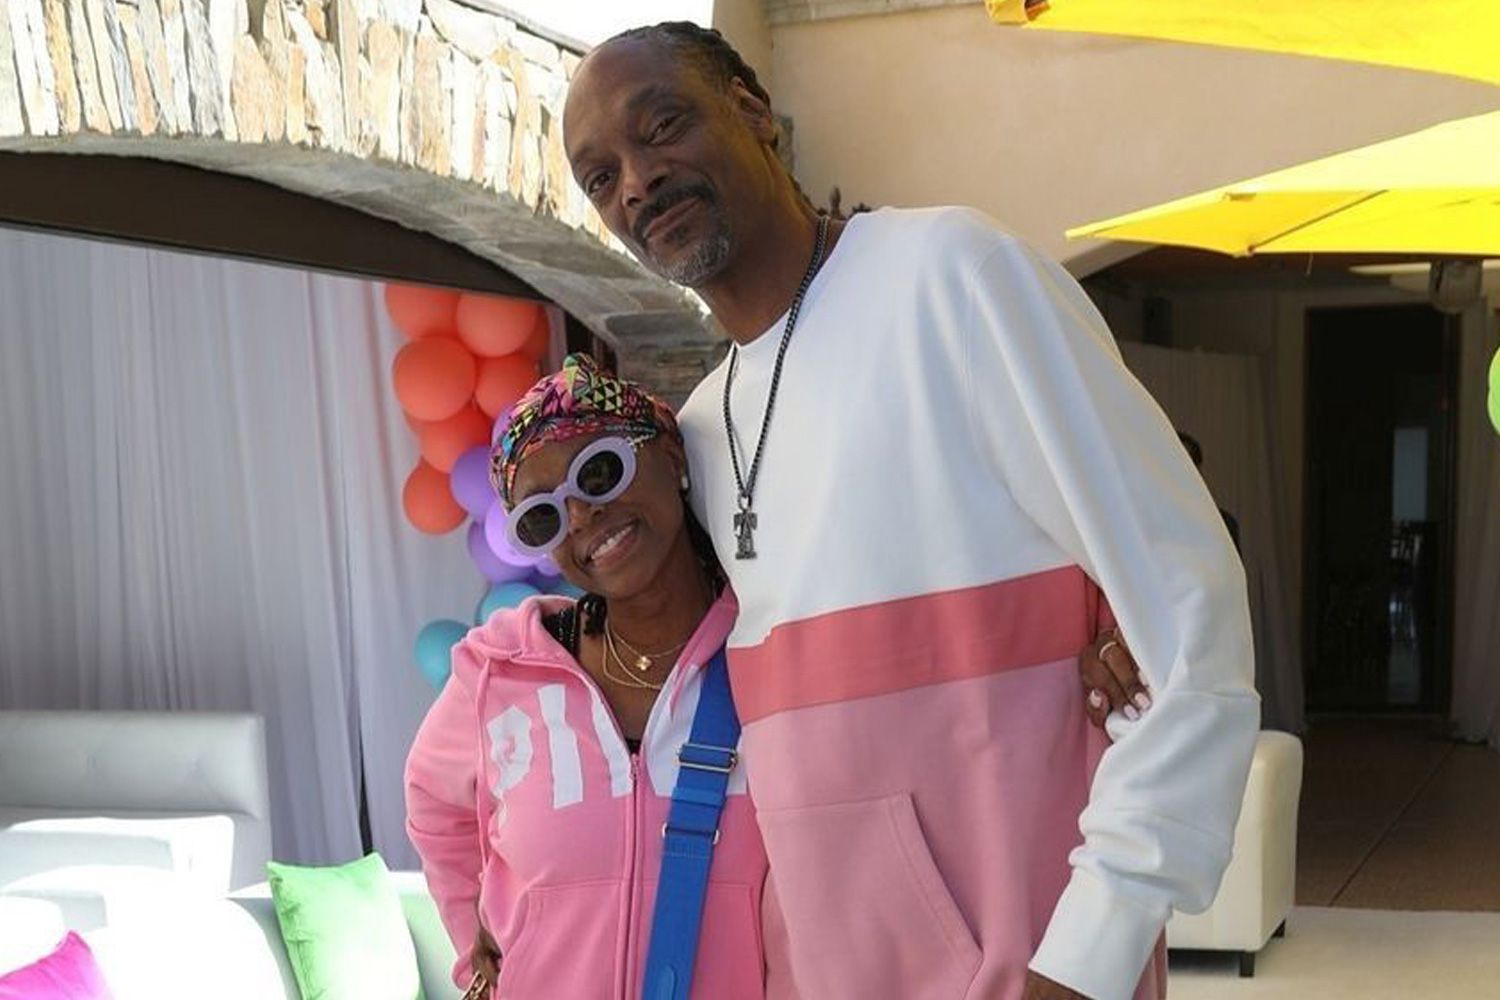 Snoop Dogg Celebrates 27 Years of Marriage to His Wife Shante Monique Broadus 